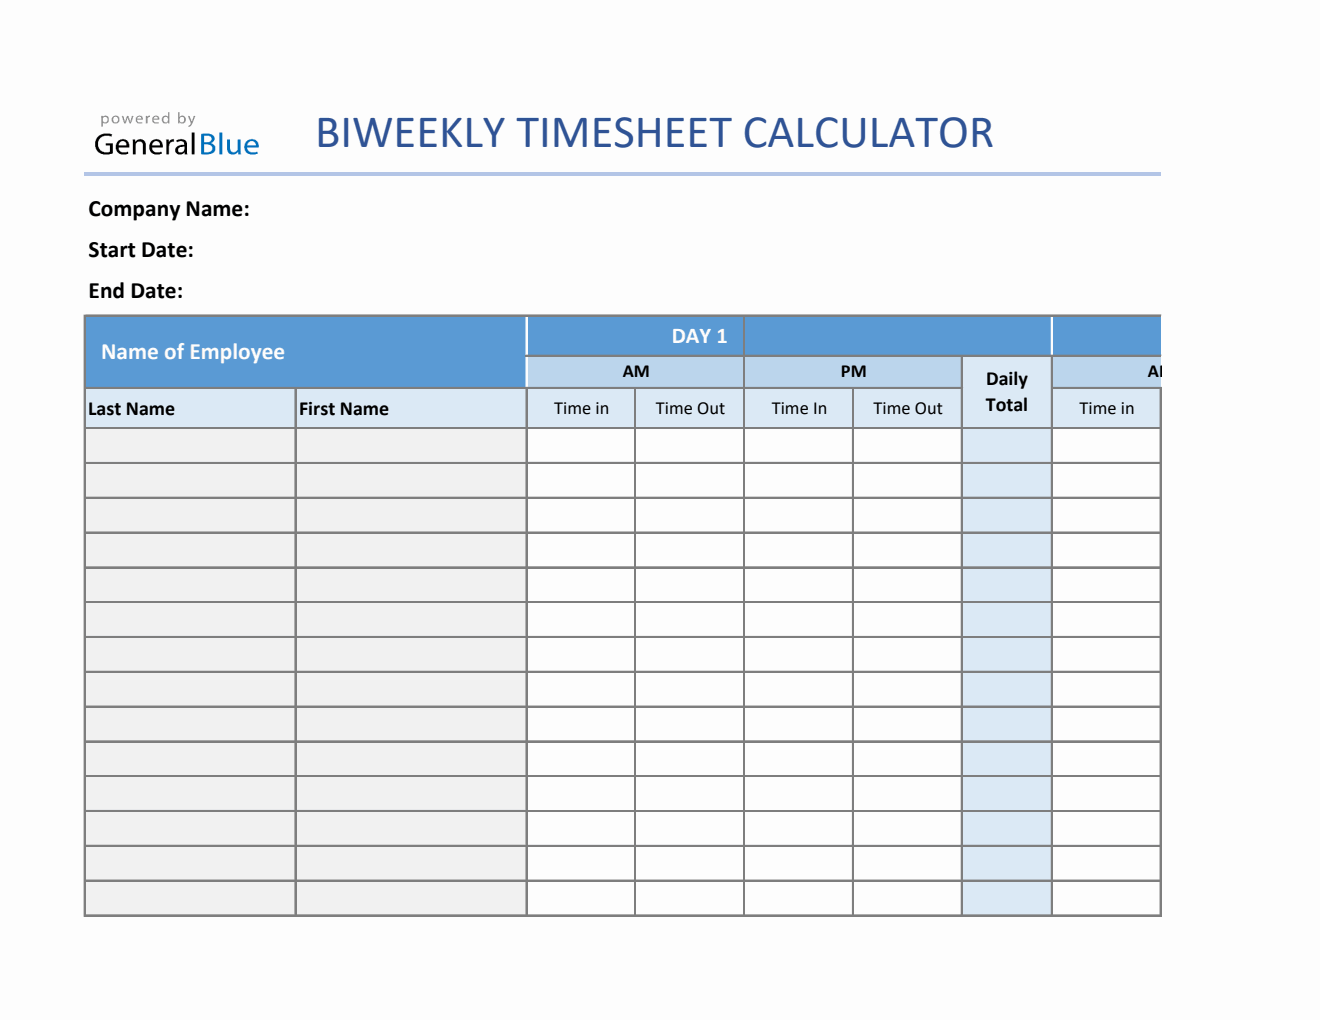 Biweekly Timesheet Calculator For Multiple Employees in Excel